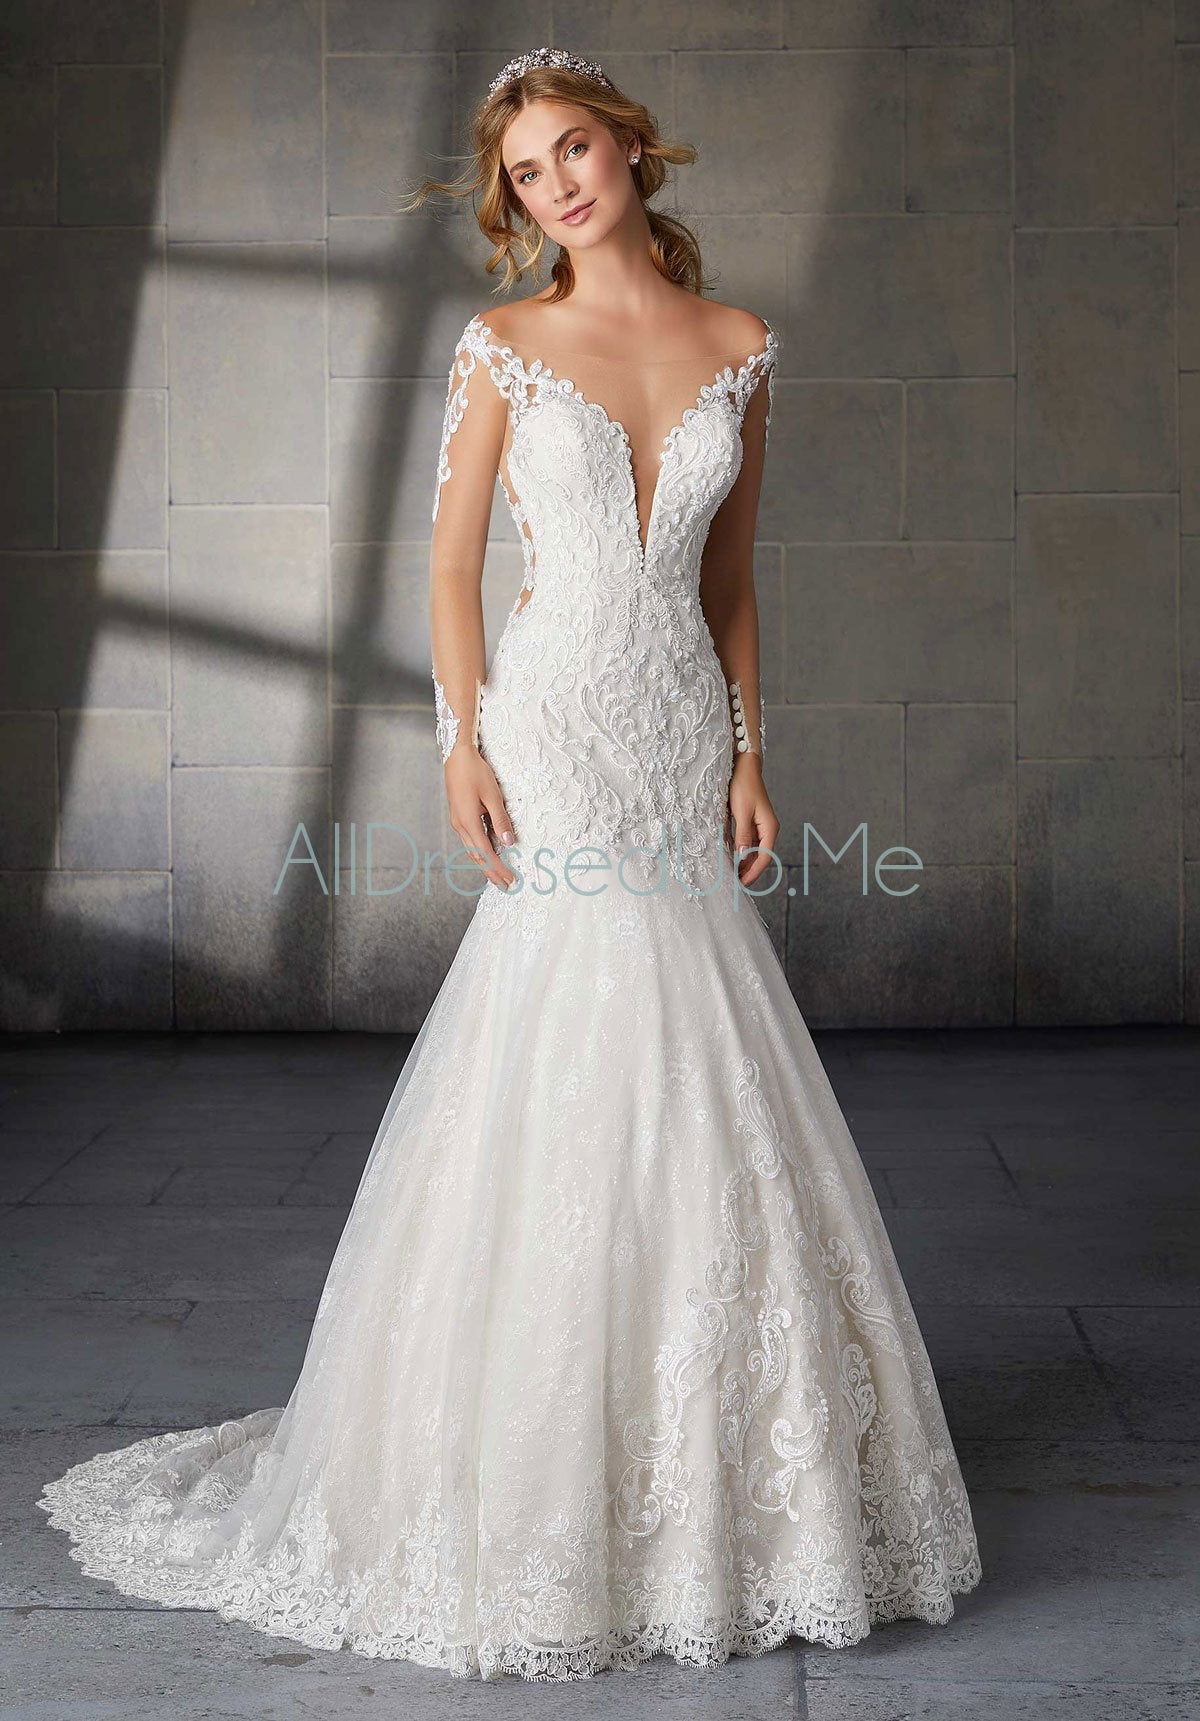 Morilee - Sharon - 2141 - Cheron's Bridal, Wedding Gown - Morilee Line - - Wedding Gowns Dresses Chattanooga Hixson Shops Boutiques Tennessee TN Georgia GA MSRP Lowest Prices Sale Discount